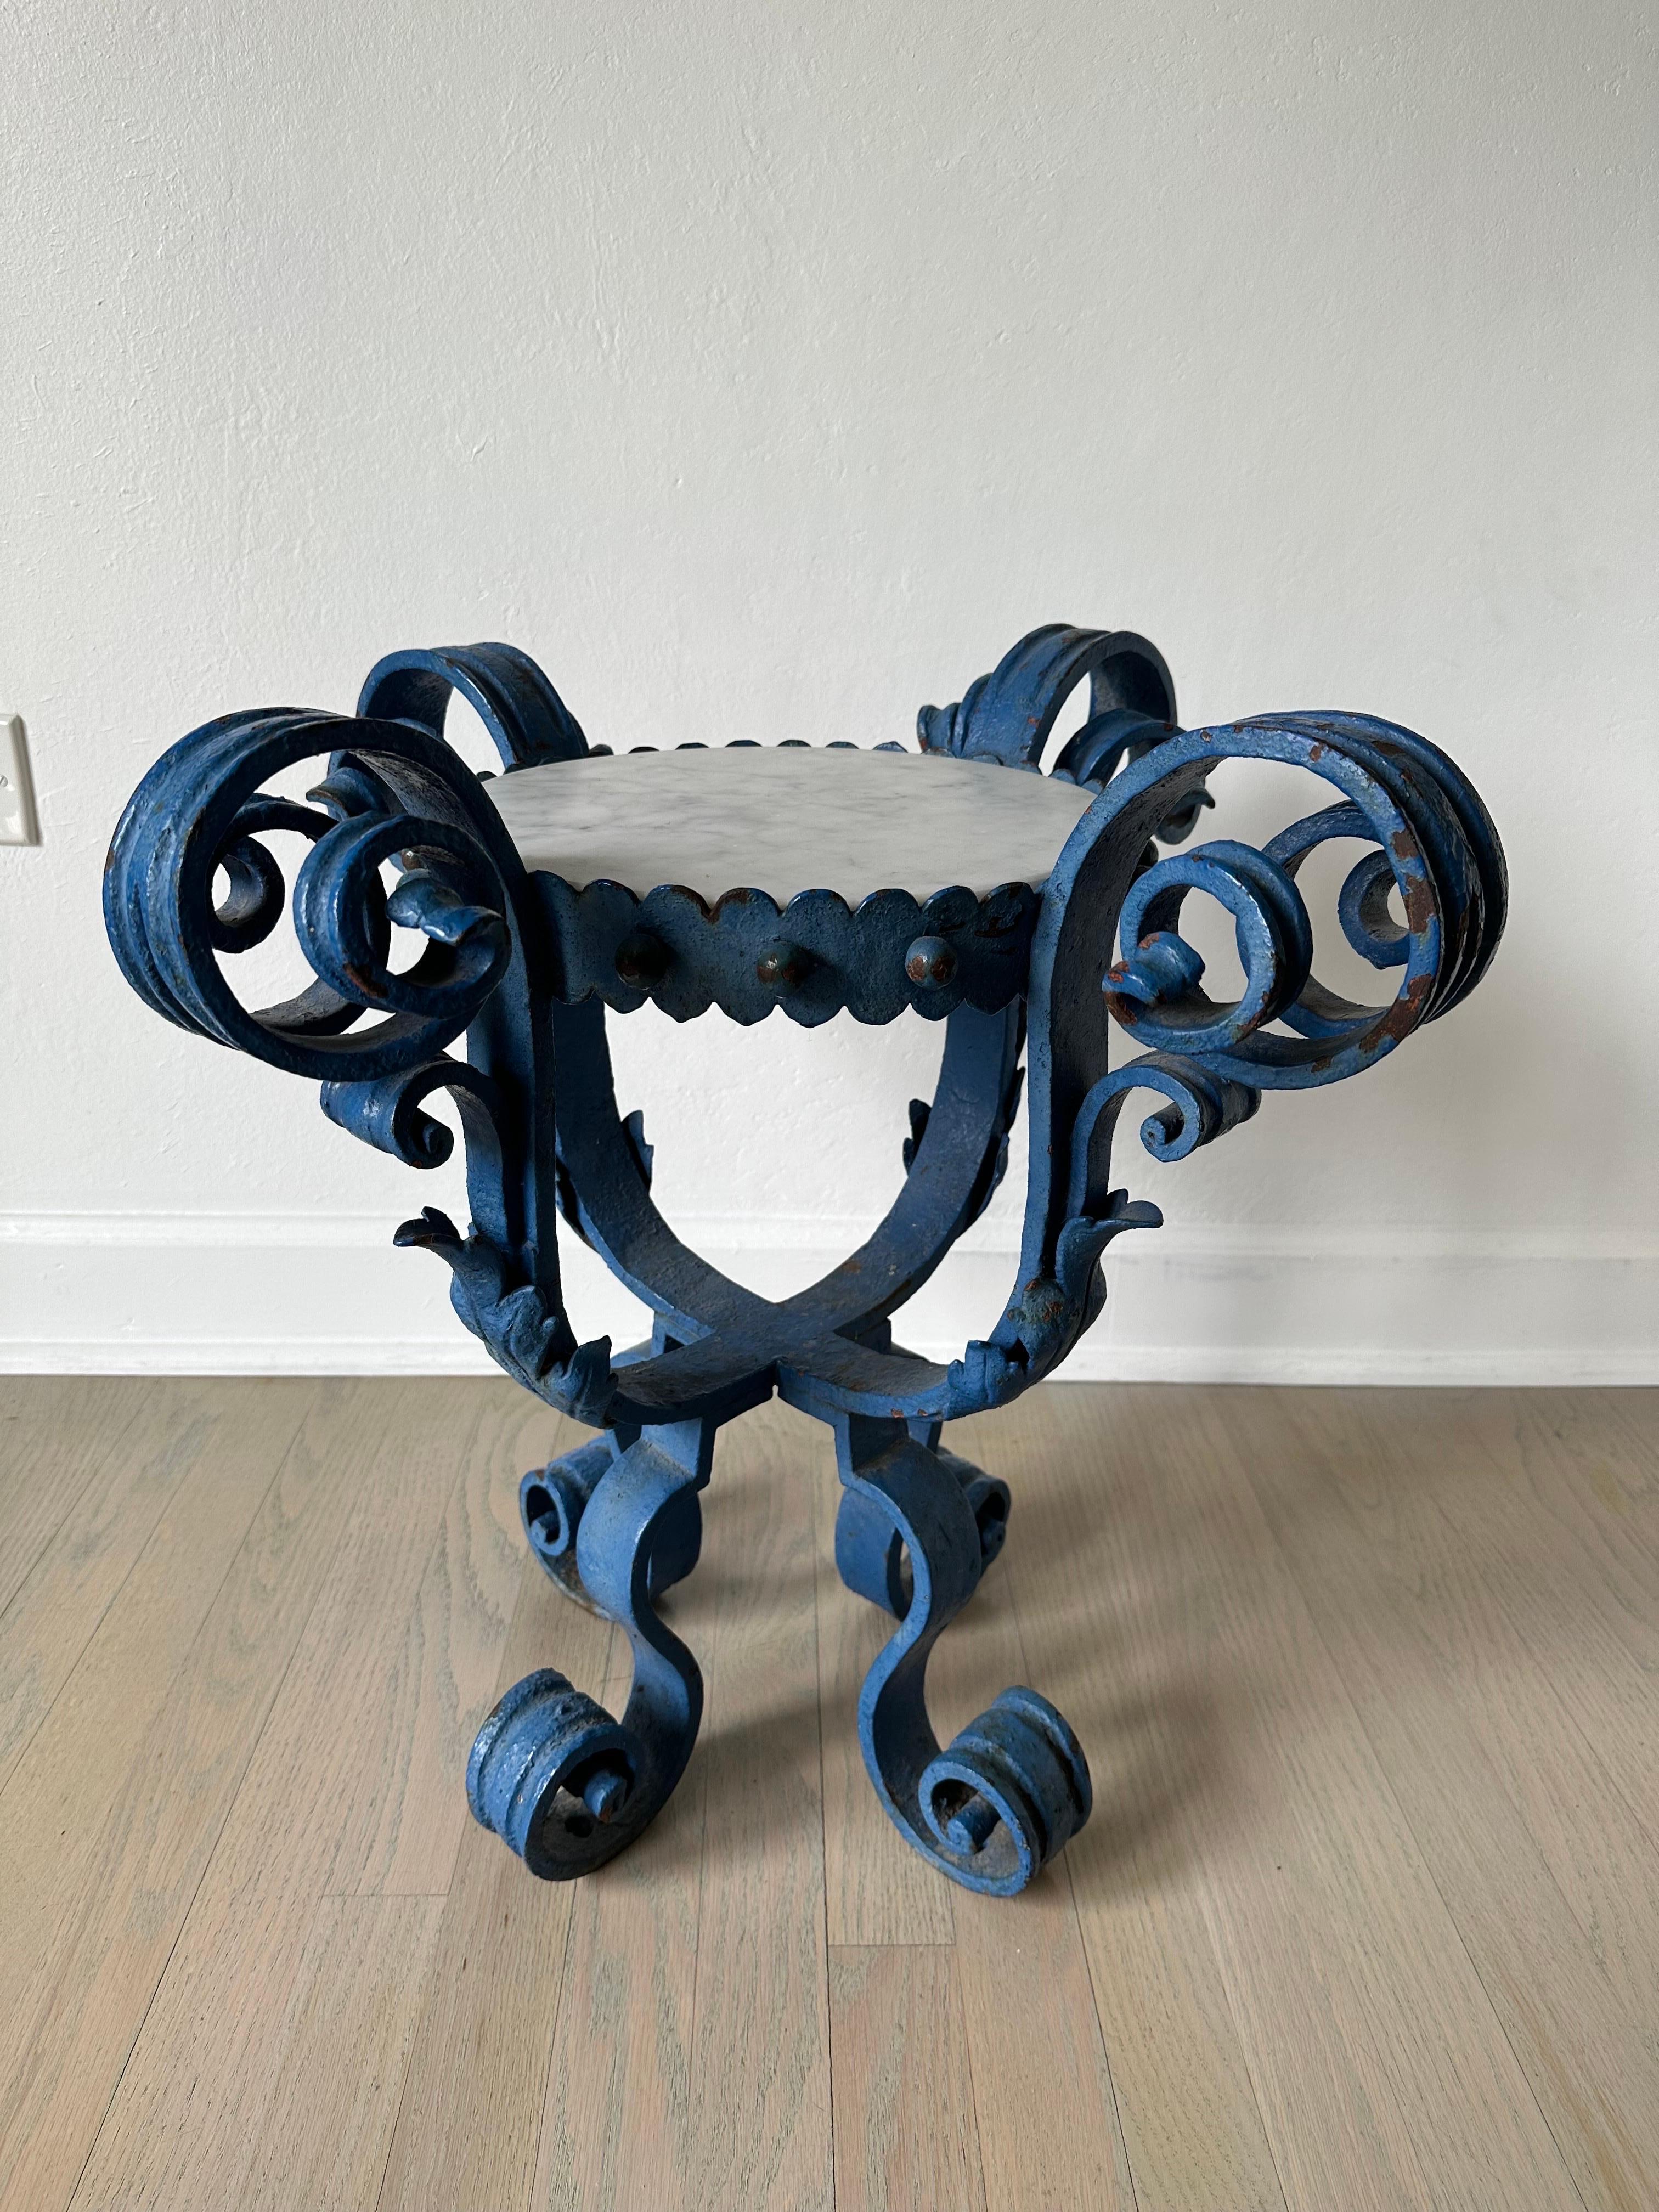 This is a stunning blue painted scrolled iron side-table. Featuring a Carrara marble round inset top and exaggerated scrolled accents and feet. Signs of age, patina and some oxidization are visible. Heavy and important.  THIS ITEM IS LOCATED AND